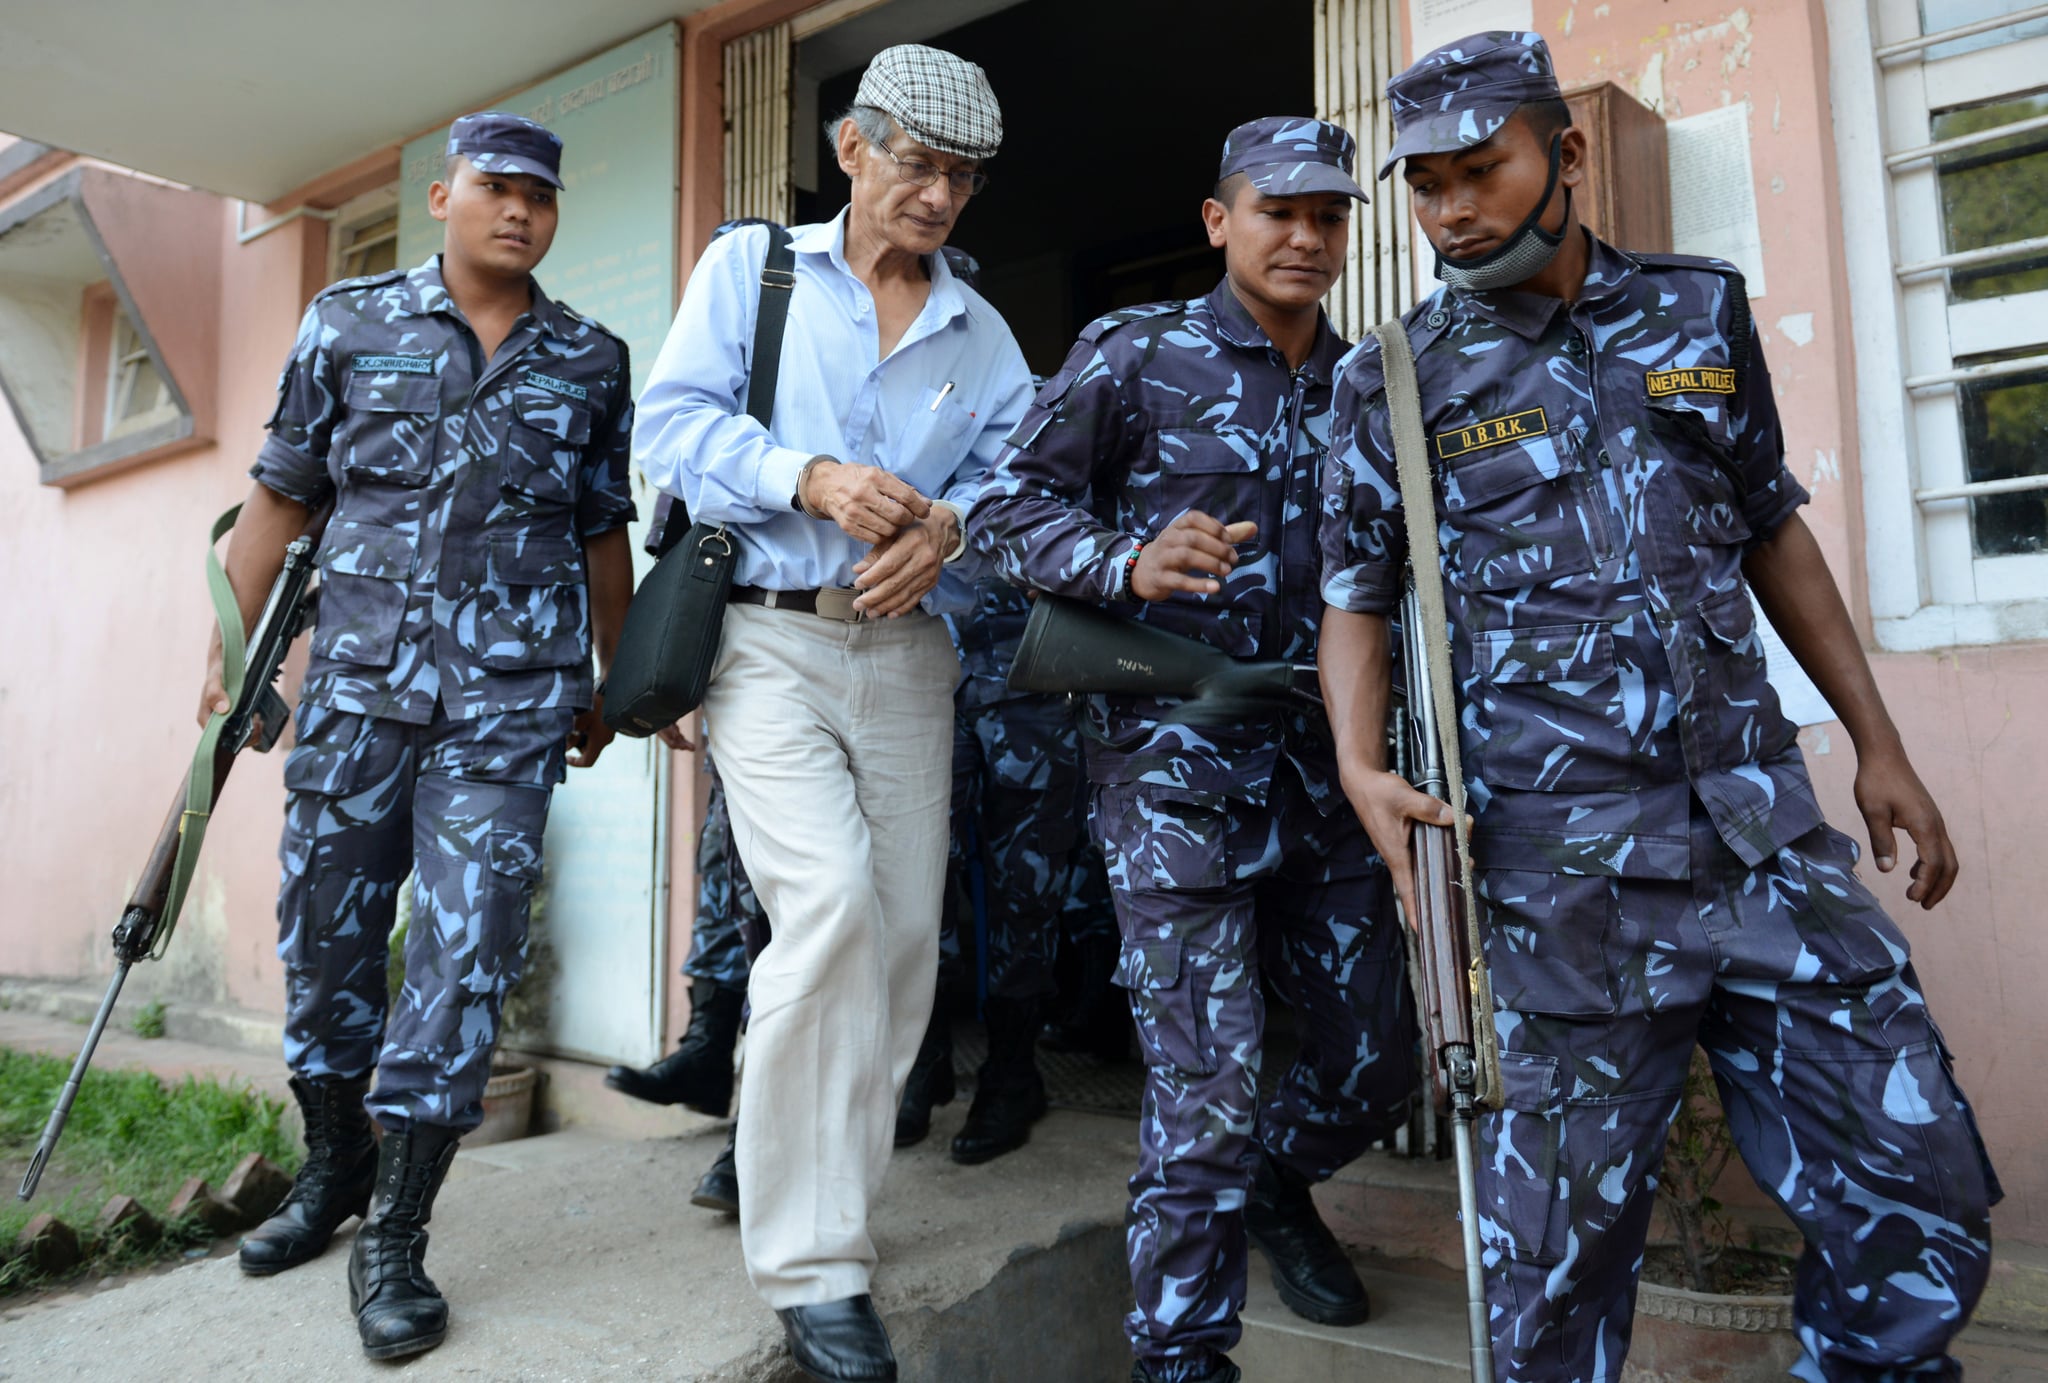 French serial killer Charles Sobhraj (2nd L) is escorted by Nepalese police to a waiting vehicle after a hearing at a district court on a case related to the murder of Canadian backpacker Laurent Ormond Carriere, in Bhaktapur on June 12, 2014. Sobhraj, a French citizen who is serving a life sentence in Nepal for the murder of an American backbacker in 1975, has been linked with a string of killings across Asia in the 1970s, earning the nickname 